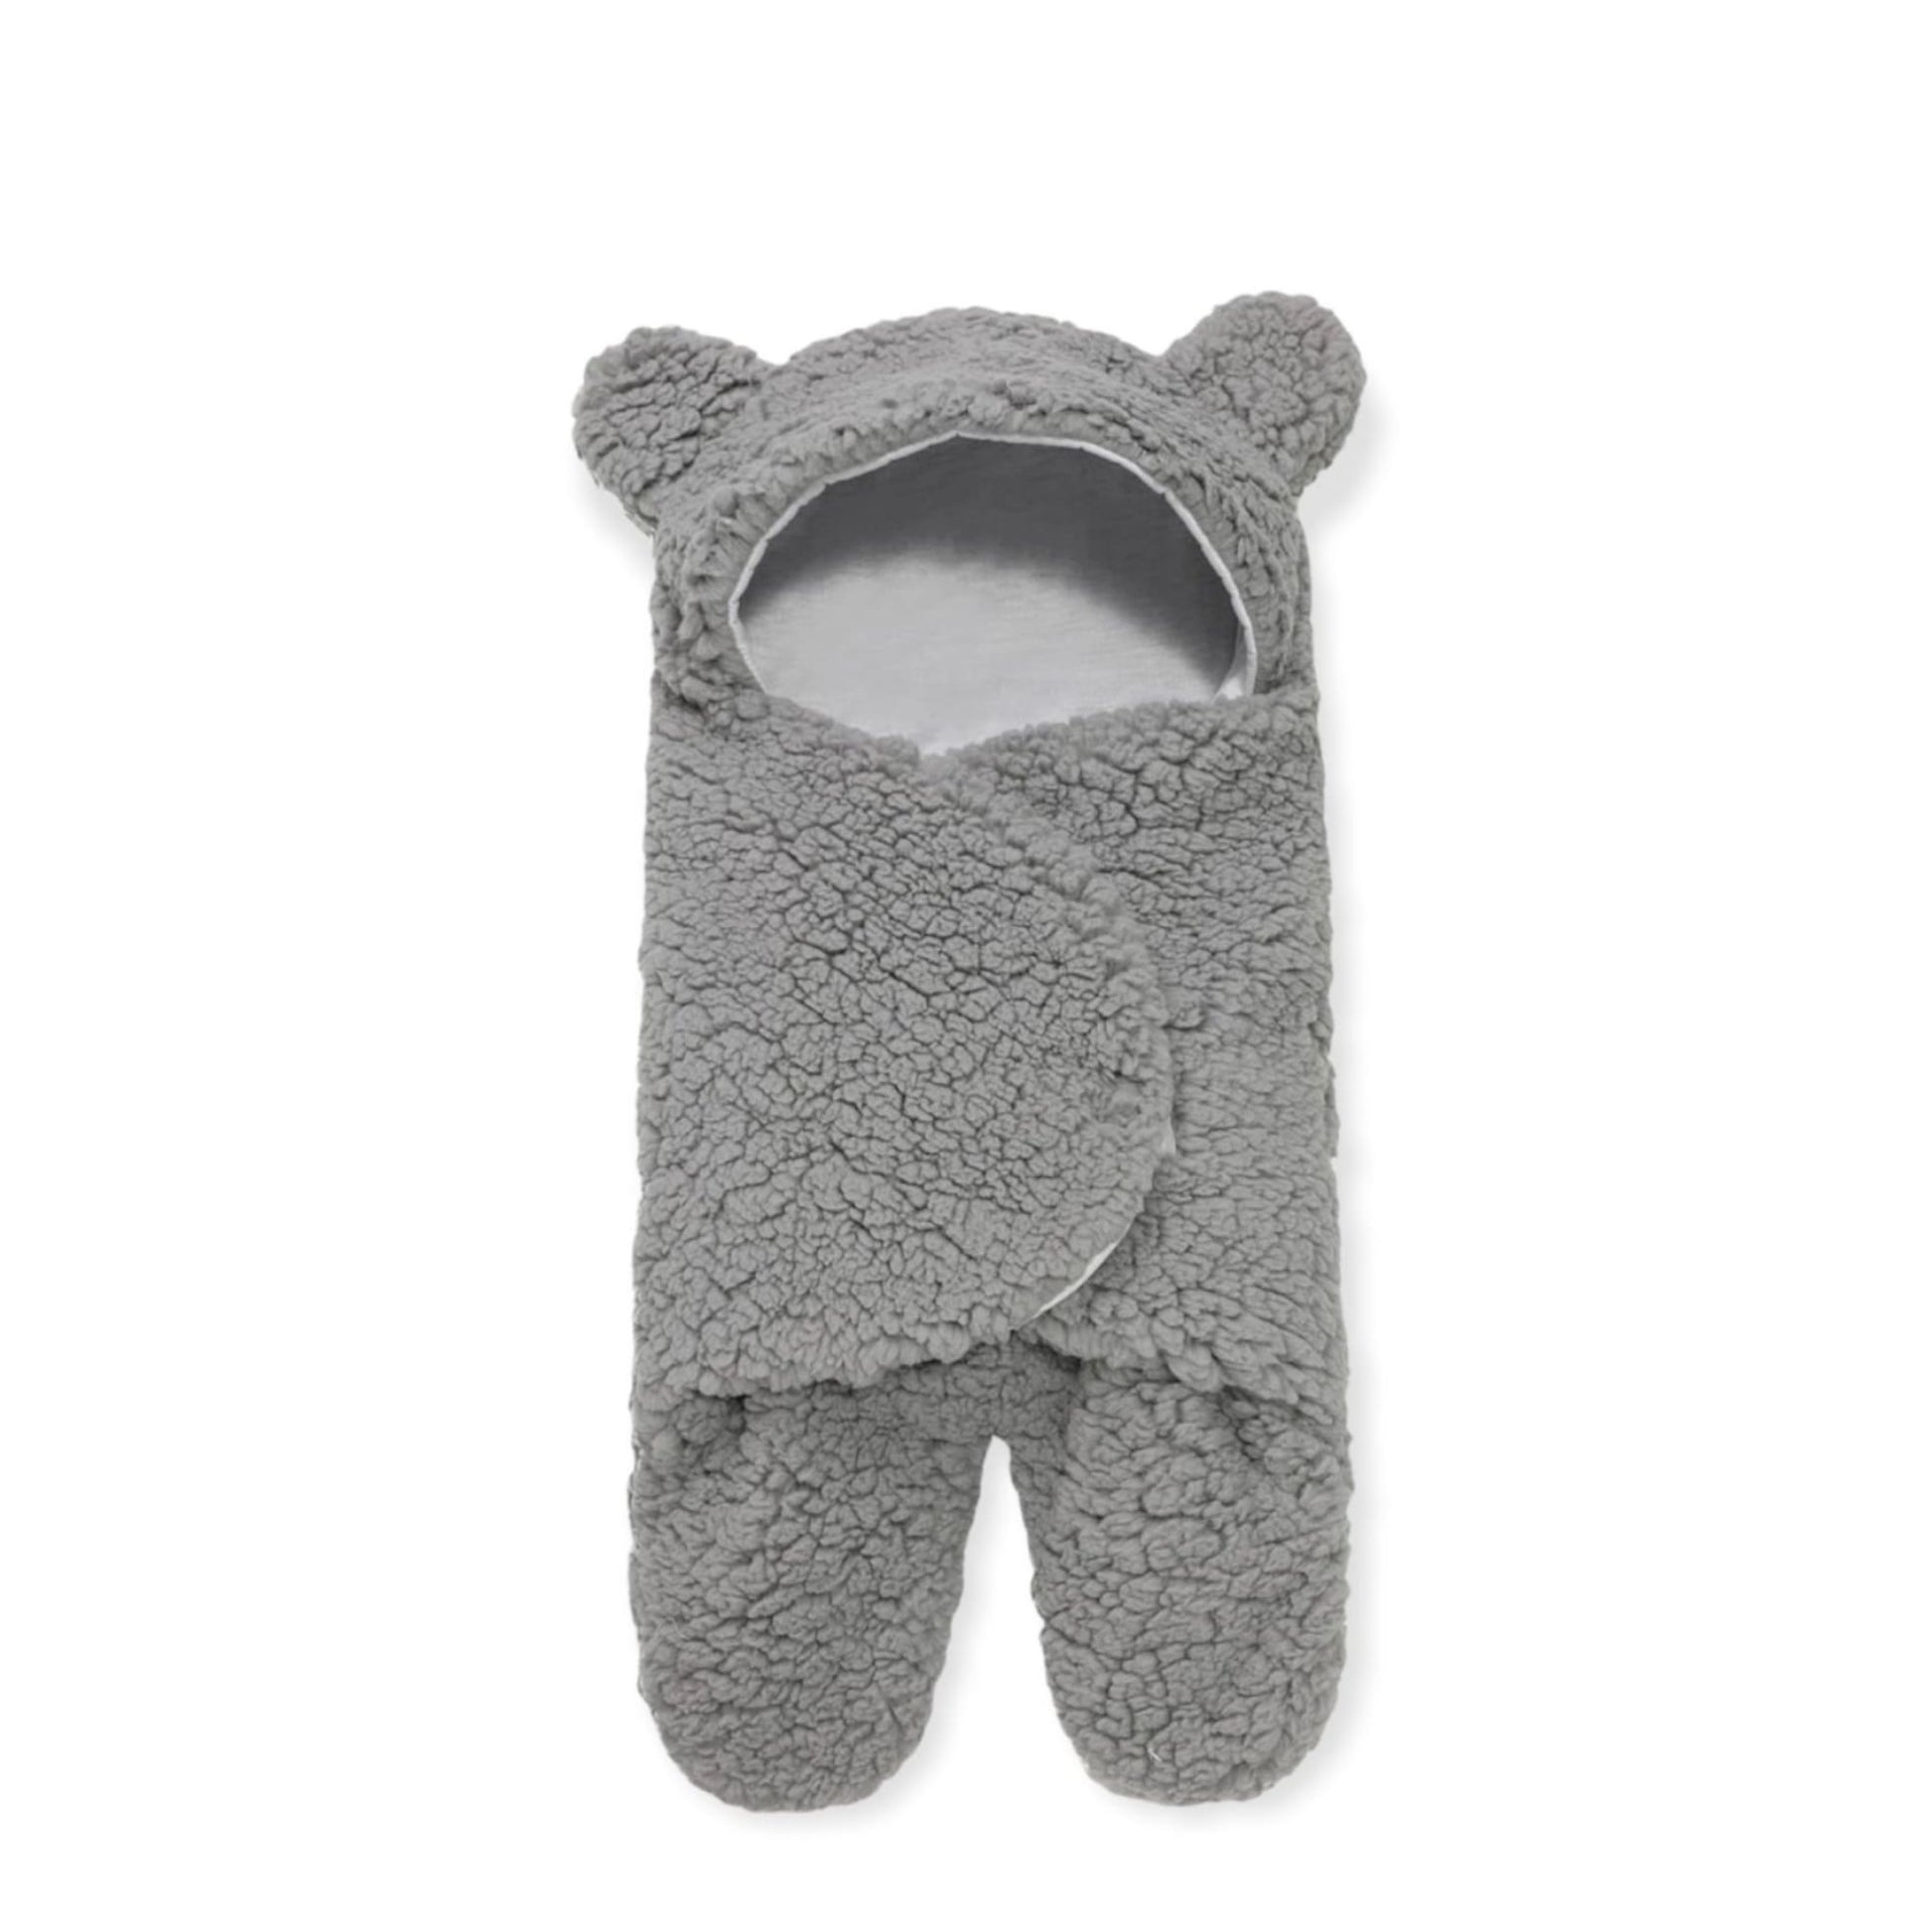 Gray baby sleeping bag and swaddle for winter - hunny bubba kids